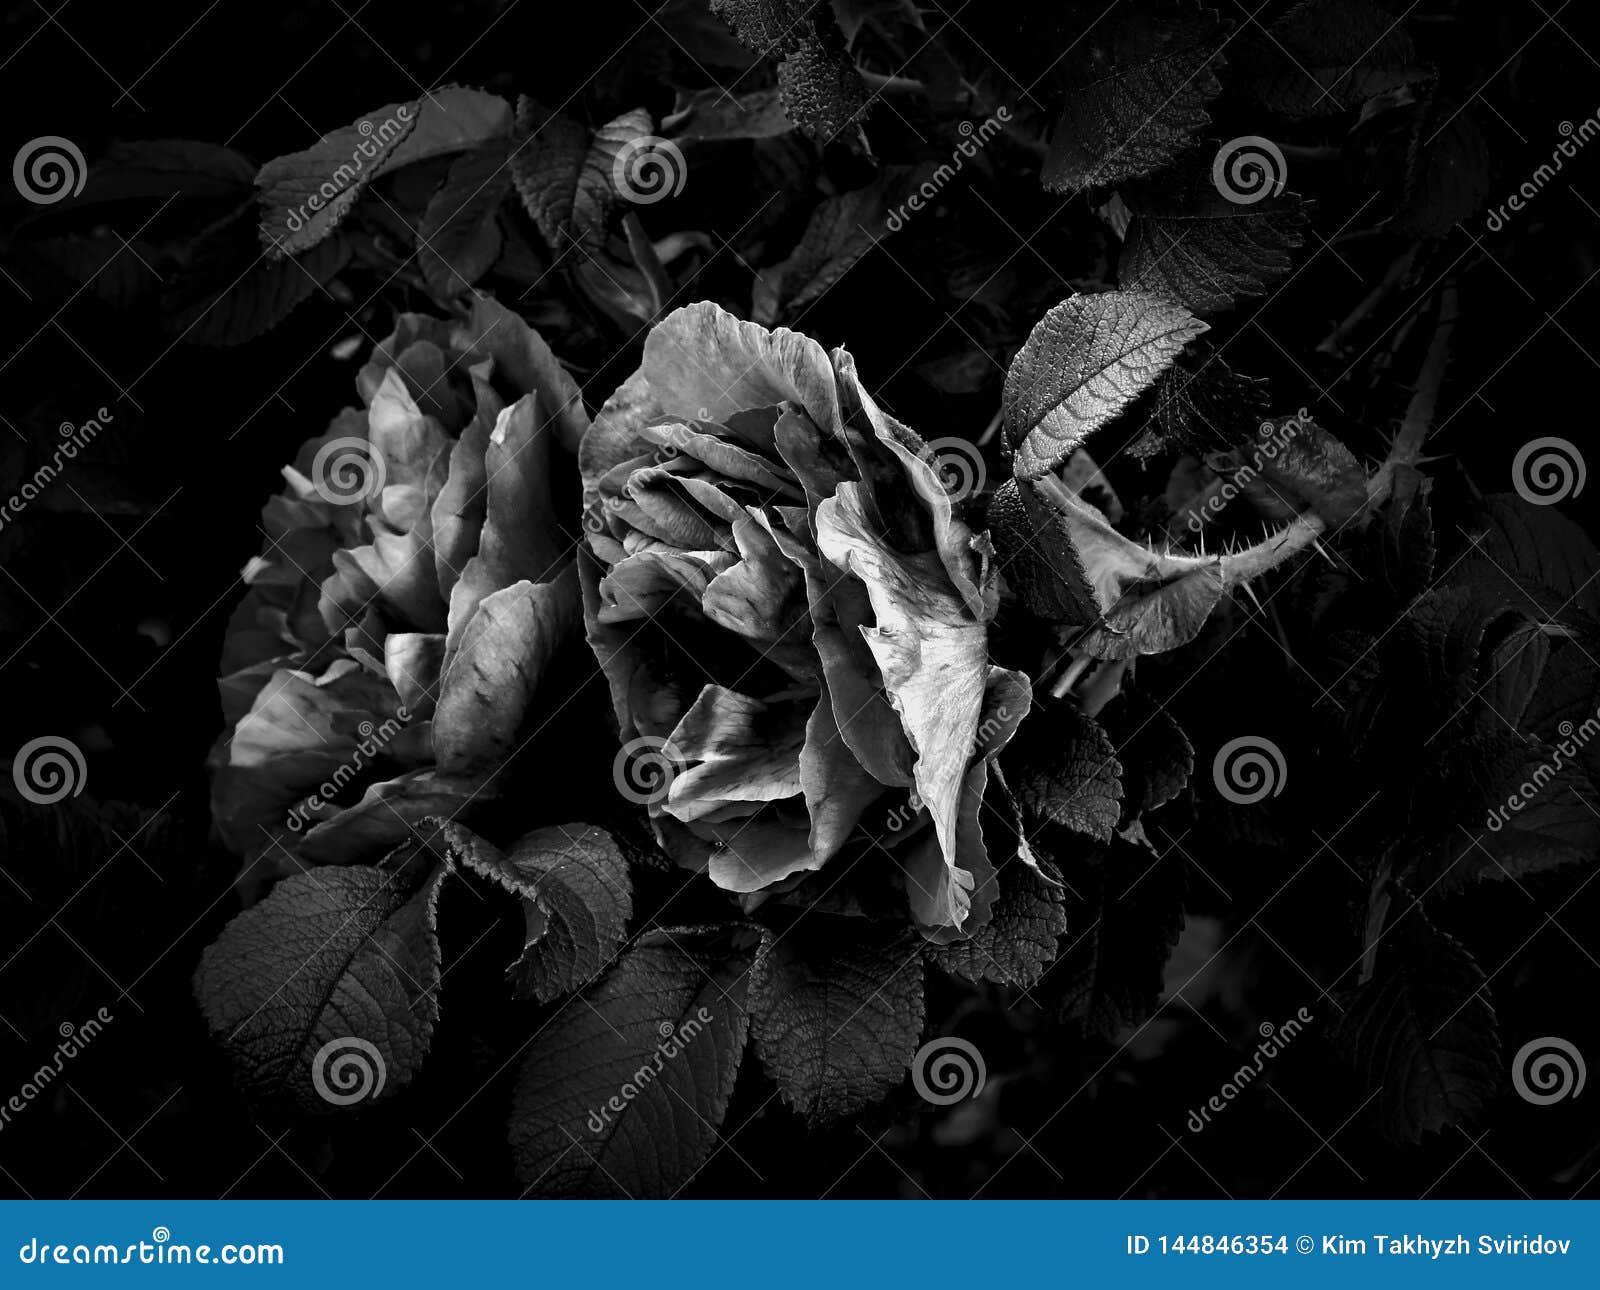 Flowers on a Black and White Photo Stock Photo - Image of blossom ...